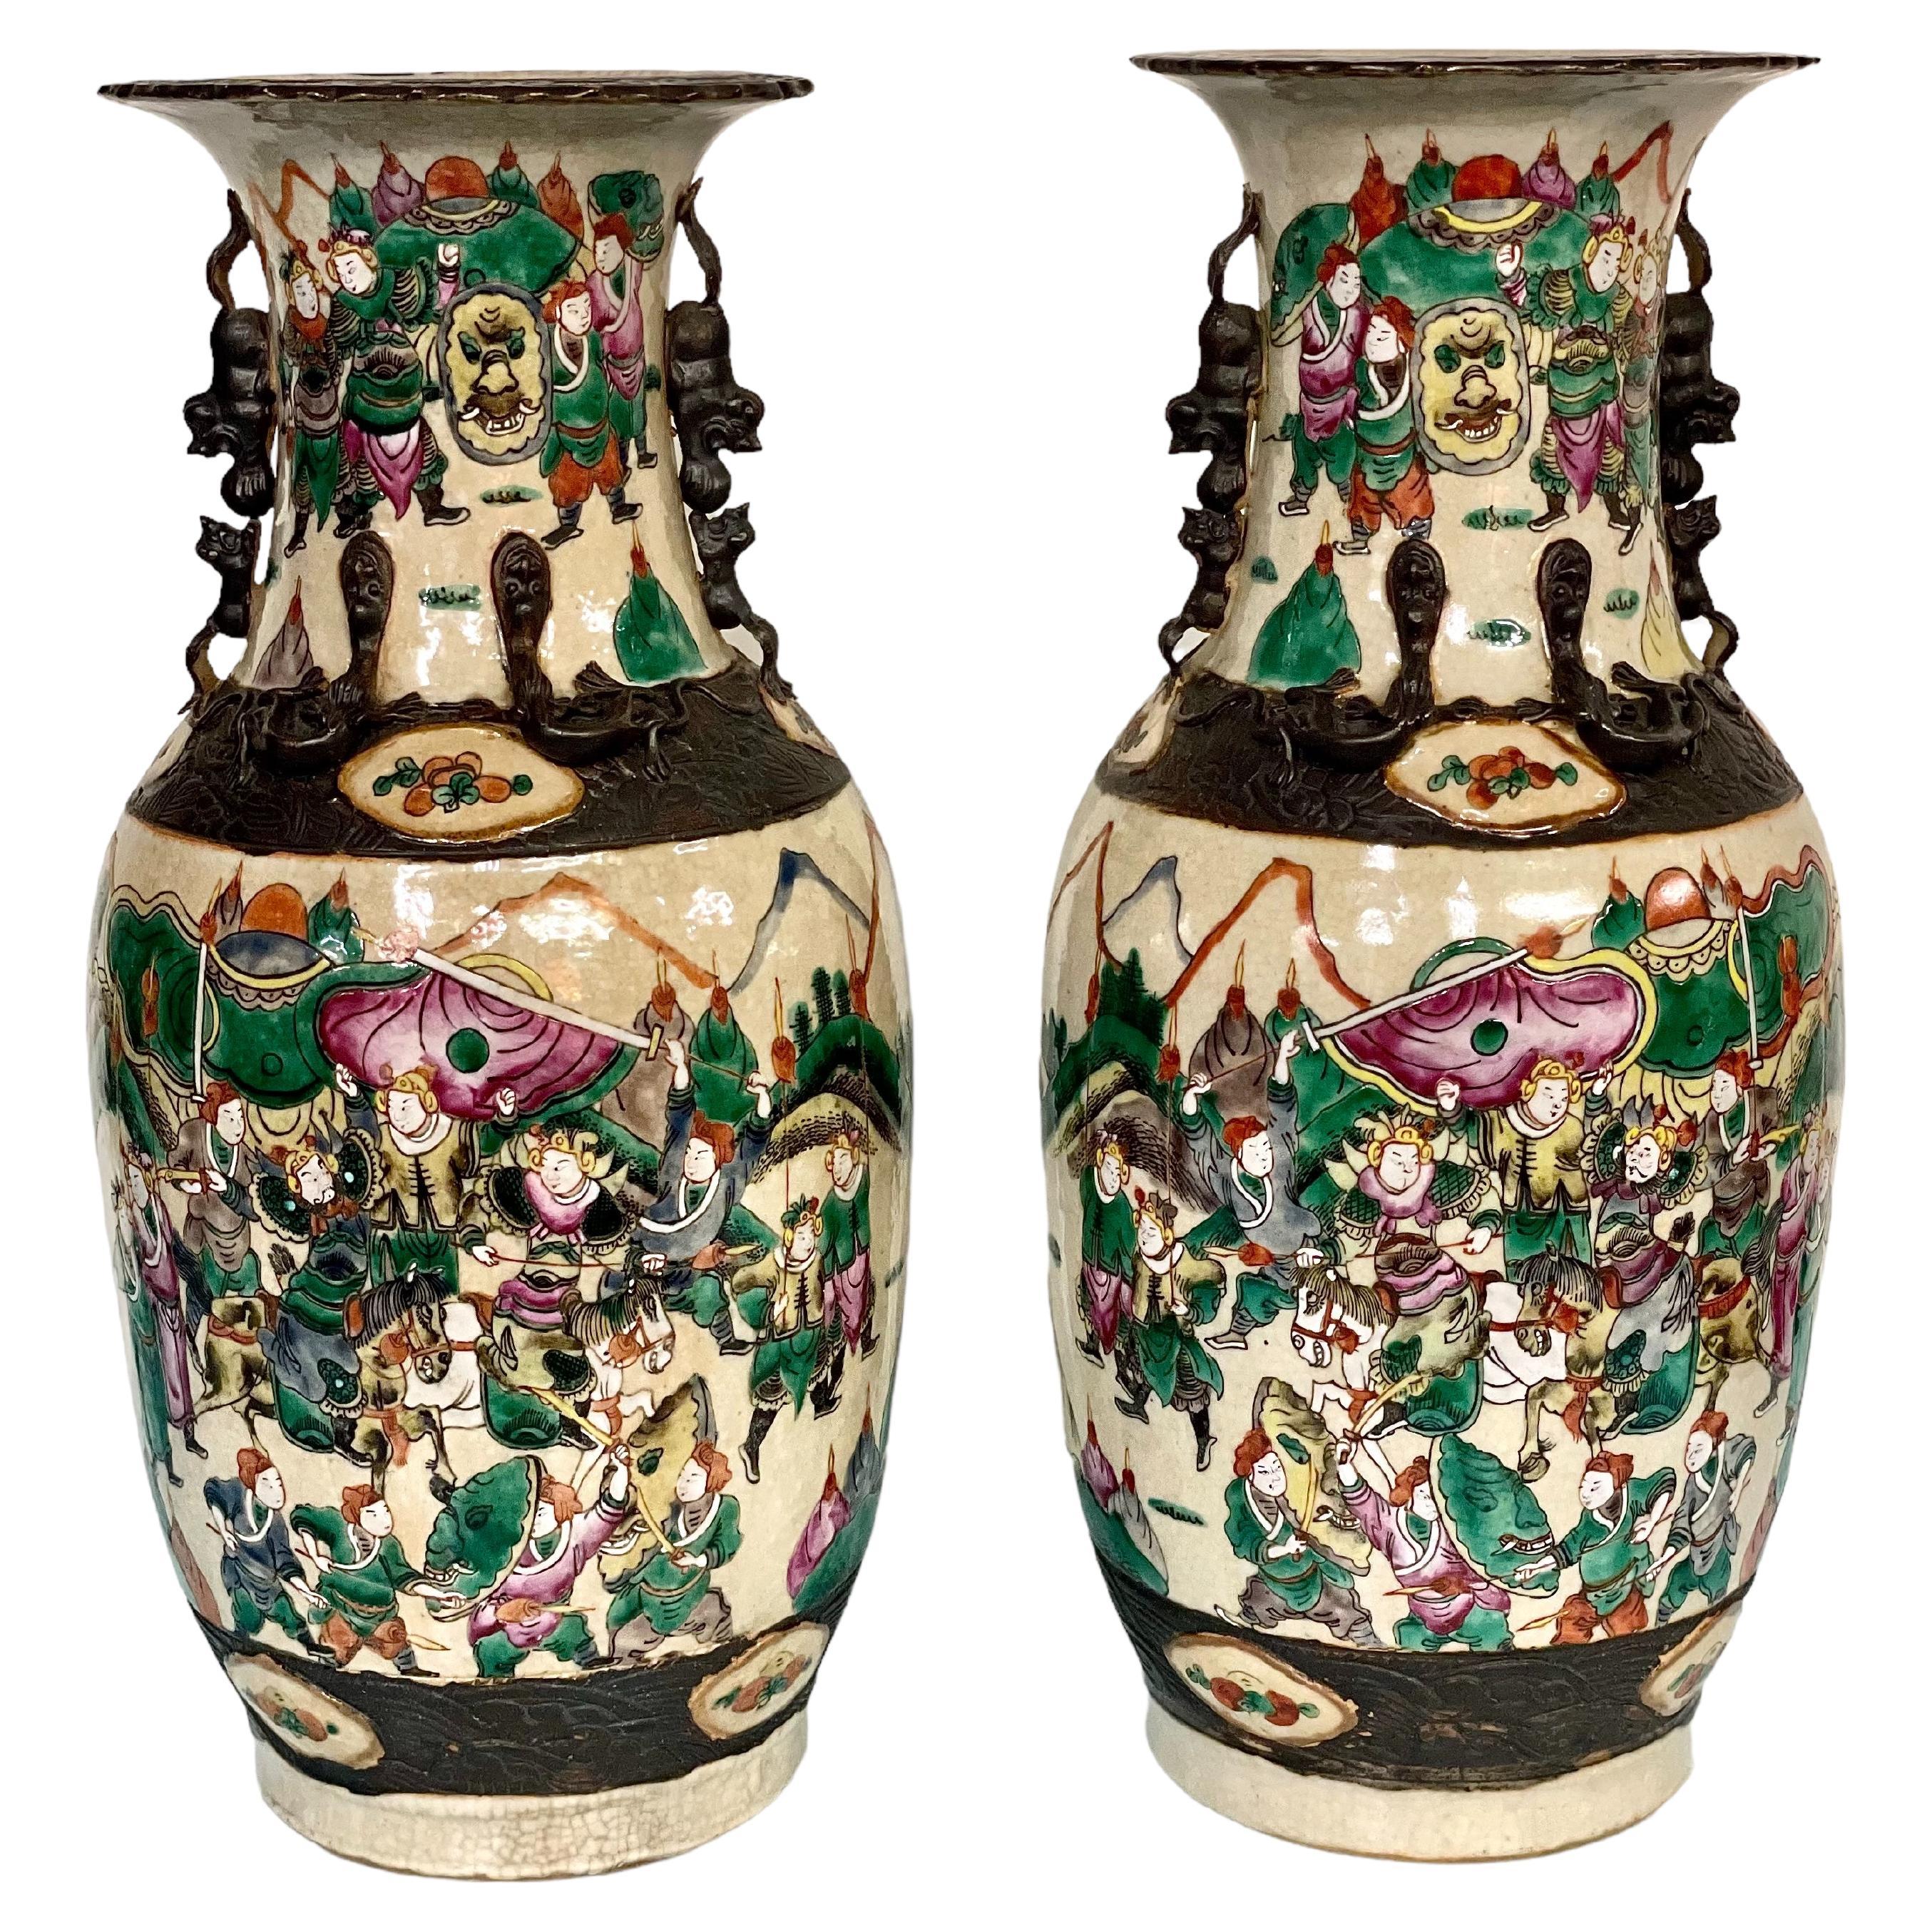 19th C. Pair of Large Chinese Nanjing Crackle Glazed Vases